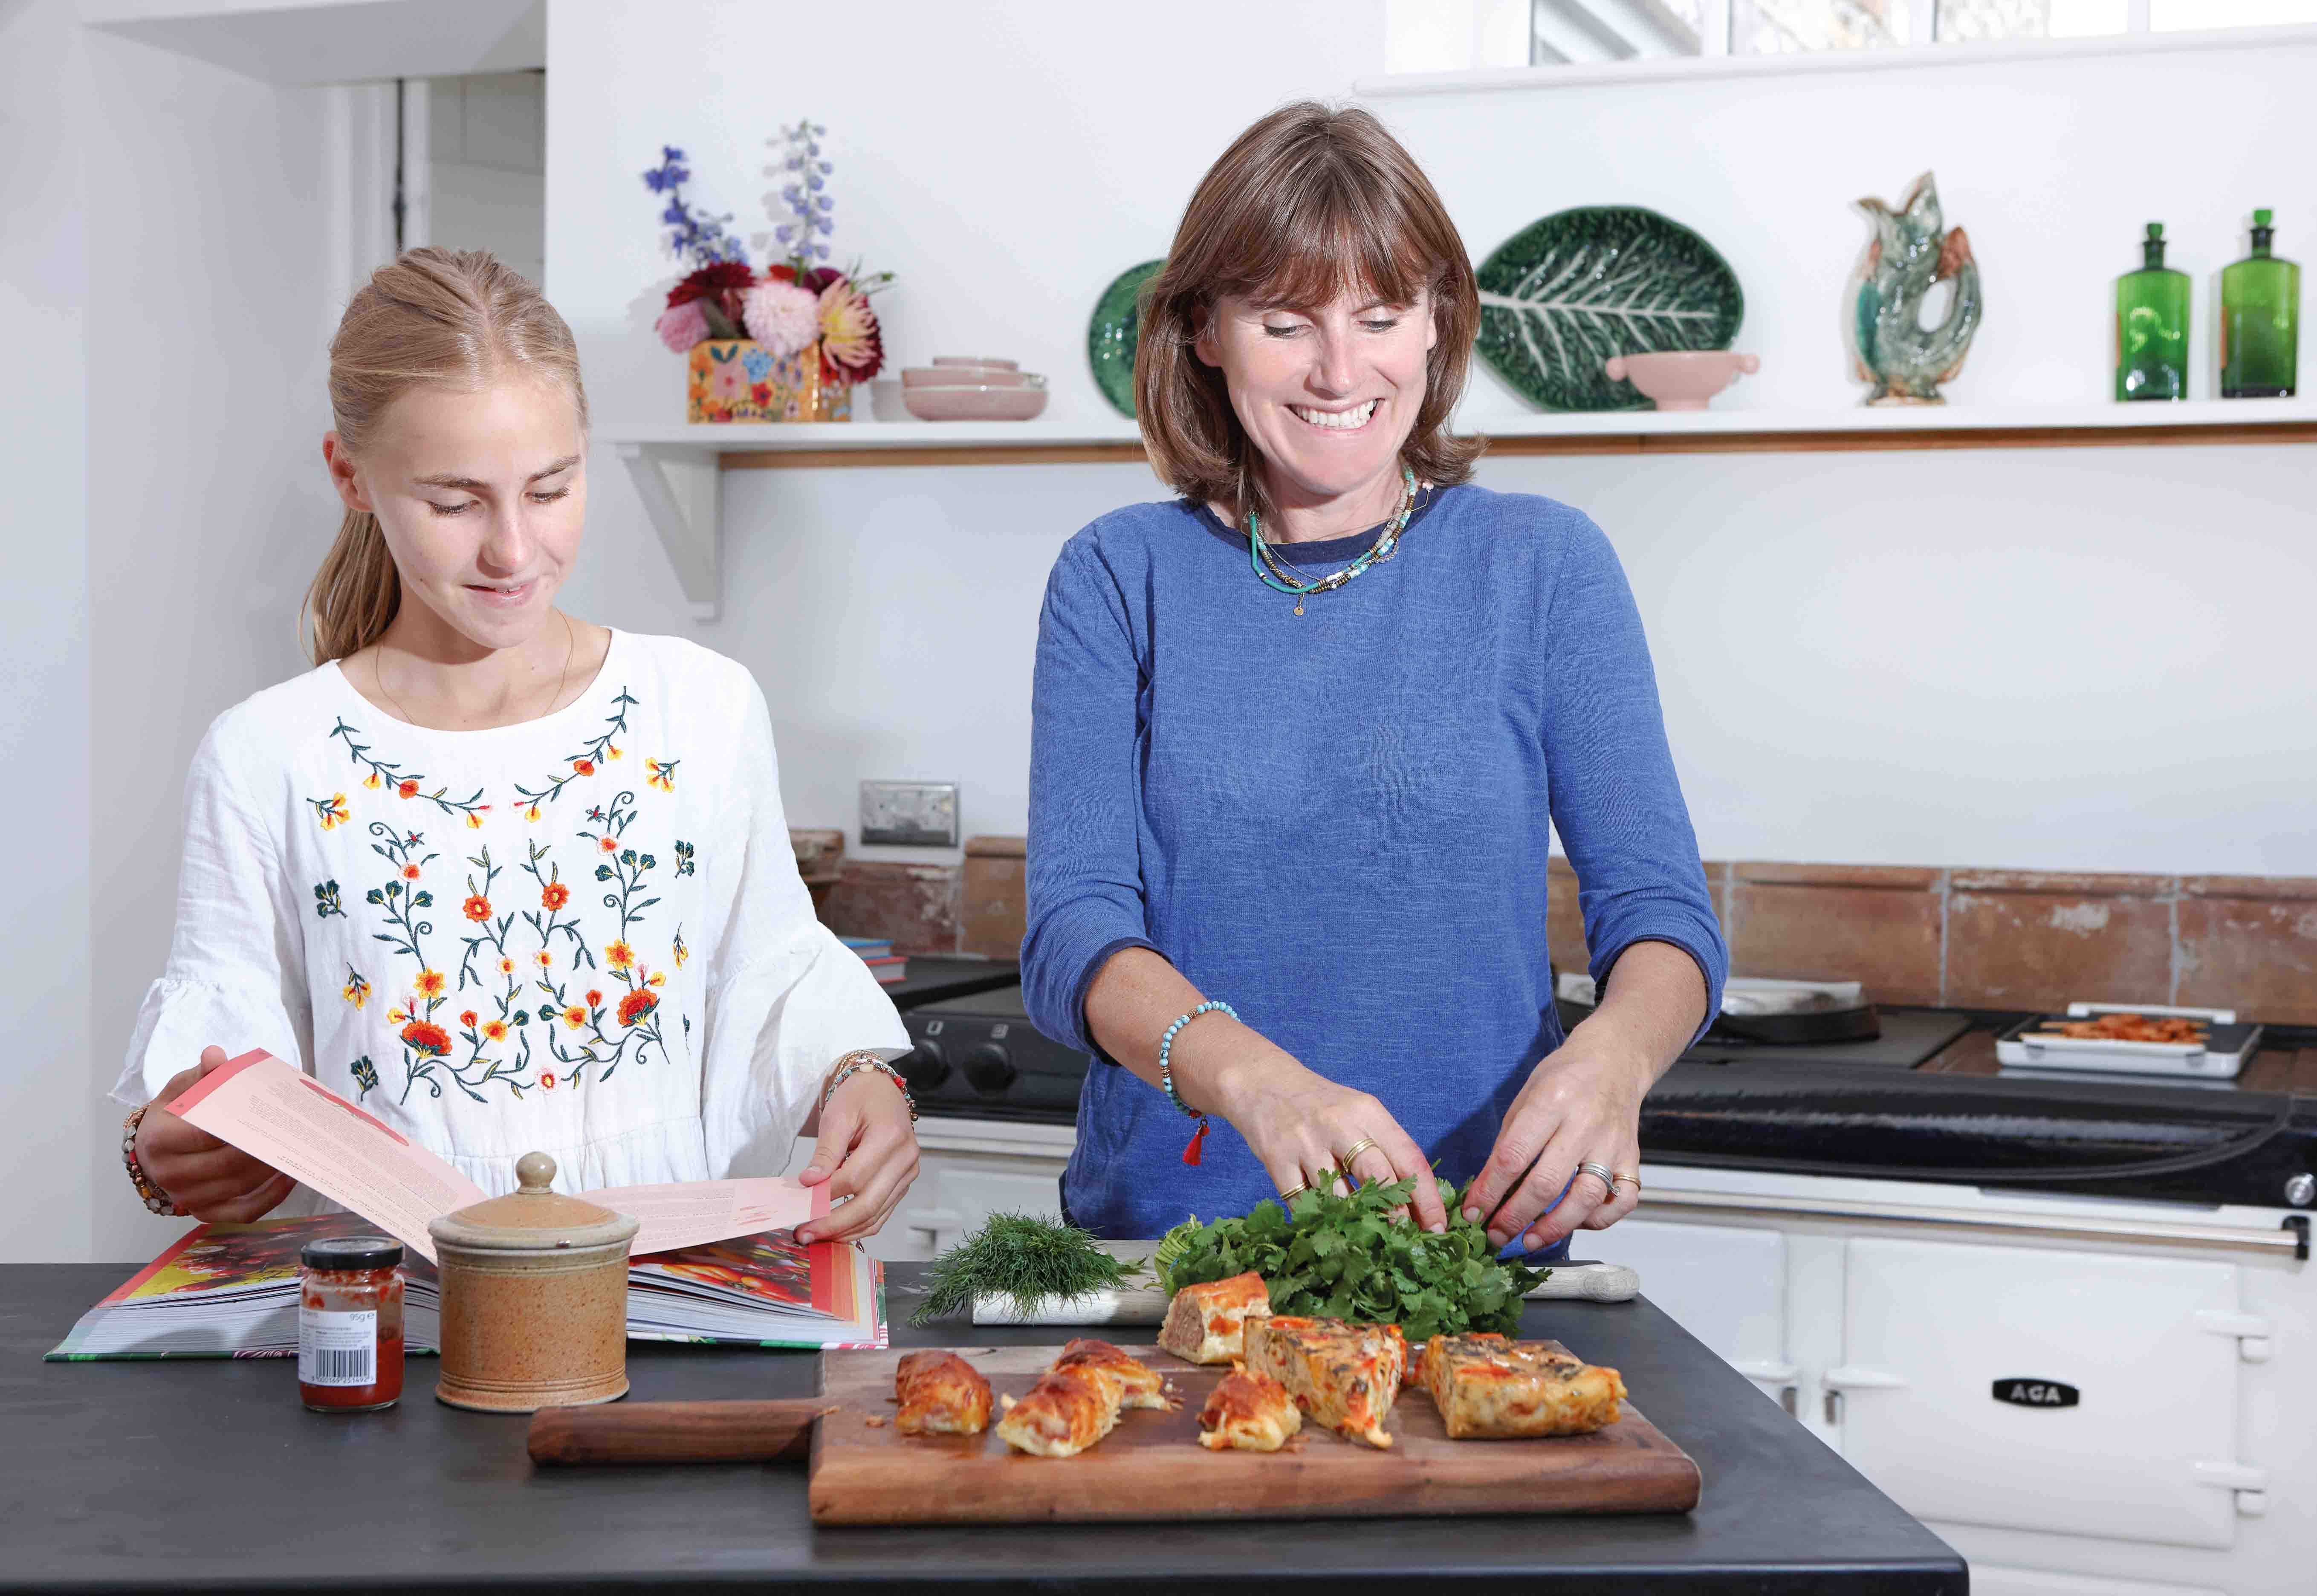 Sarah Moore and her daughter cooking in front of the AGA